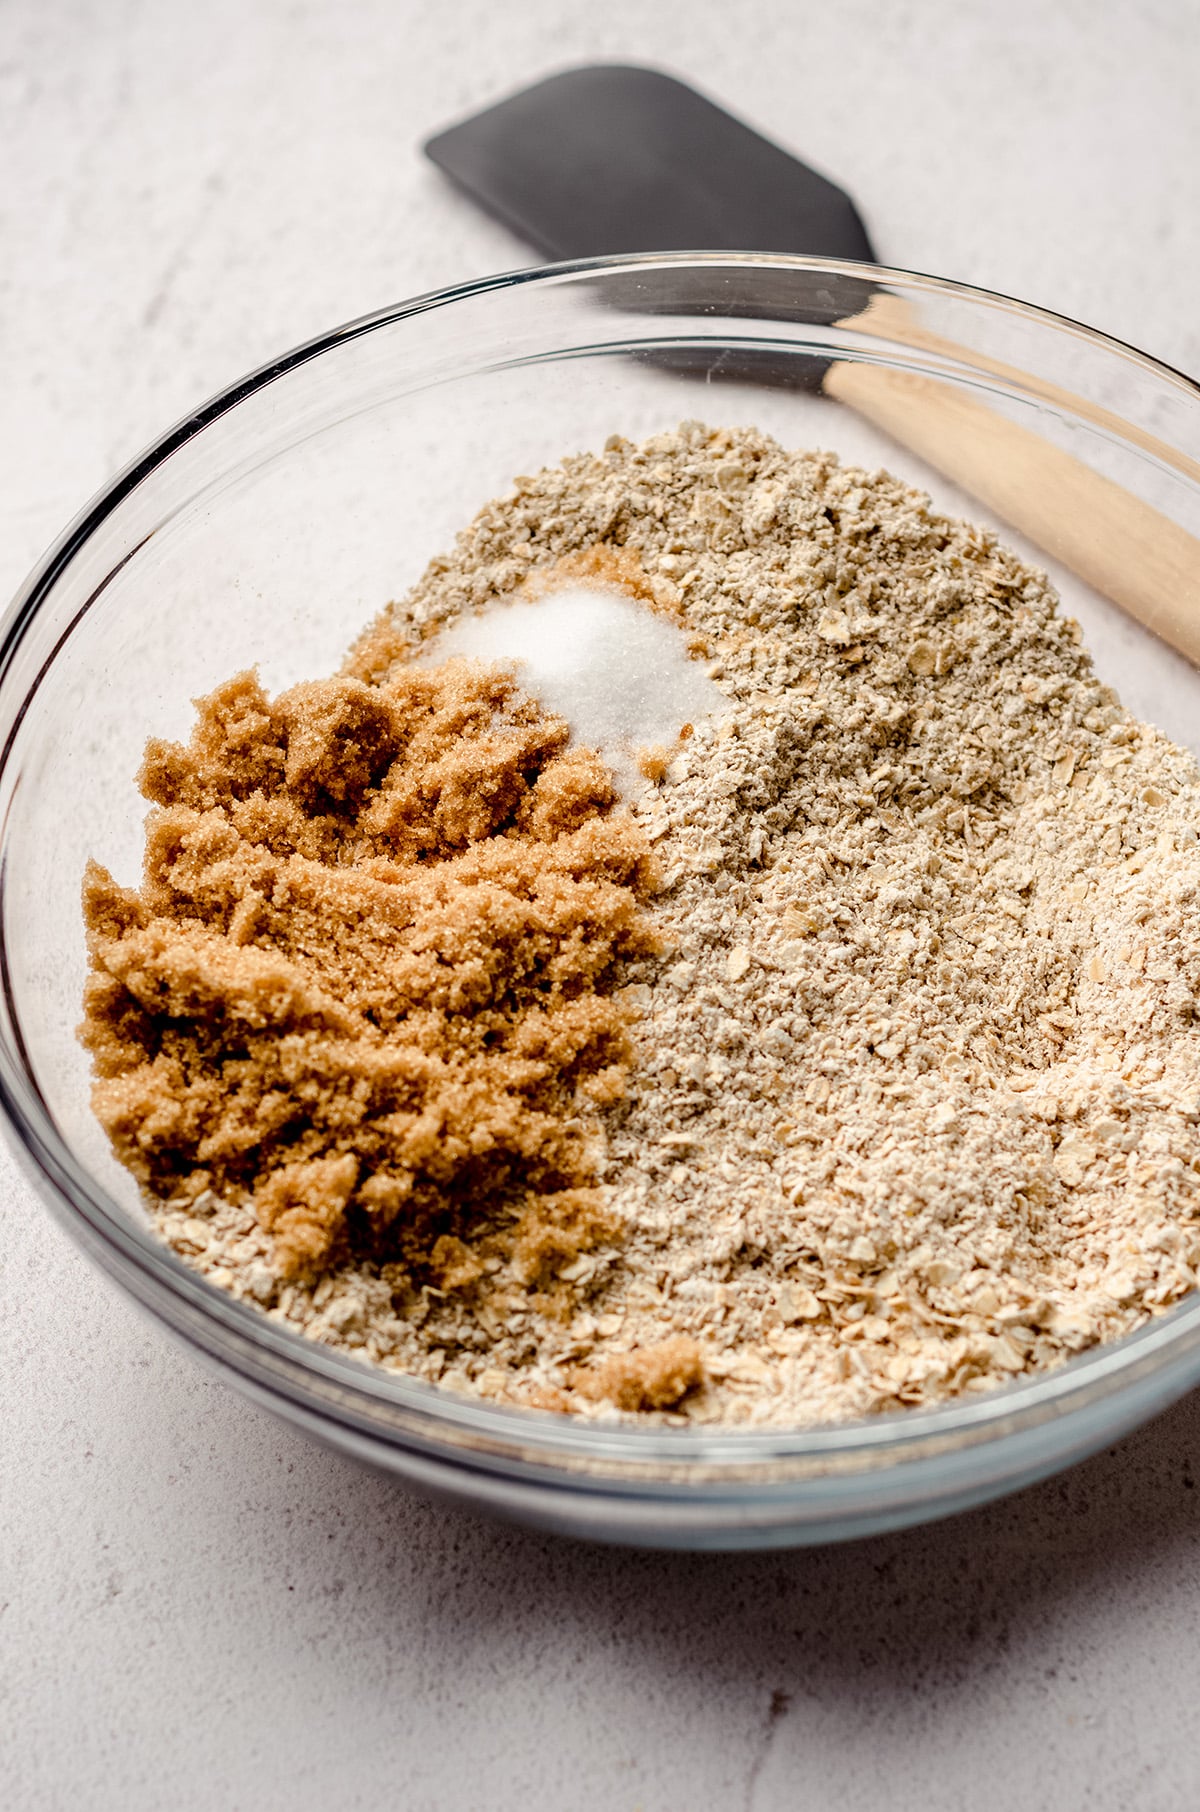 Mixing together oatmeal with brown sugar.